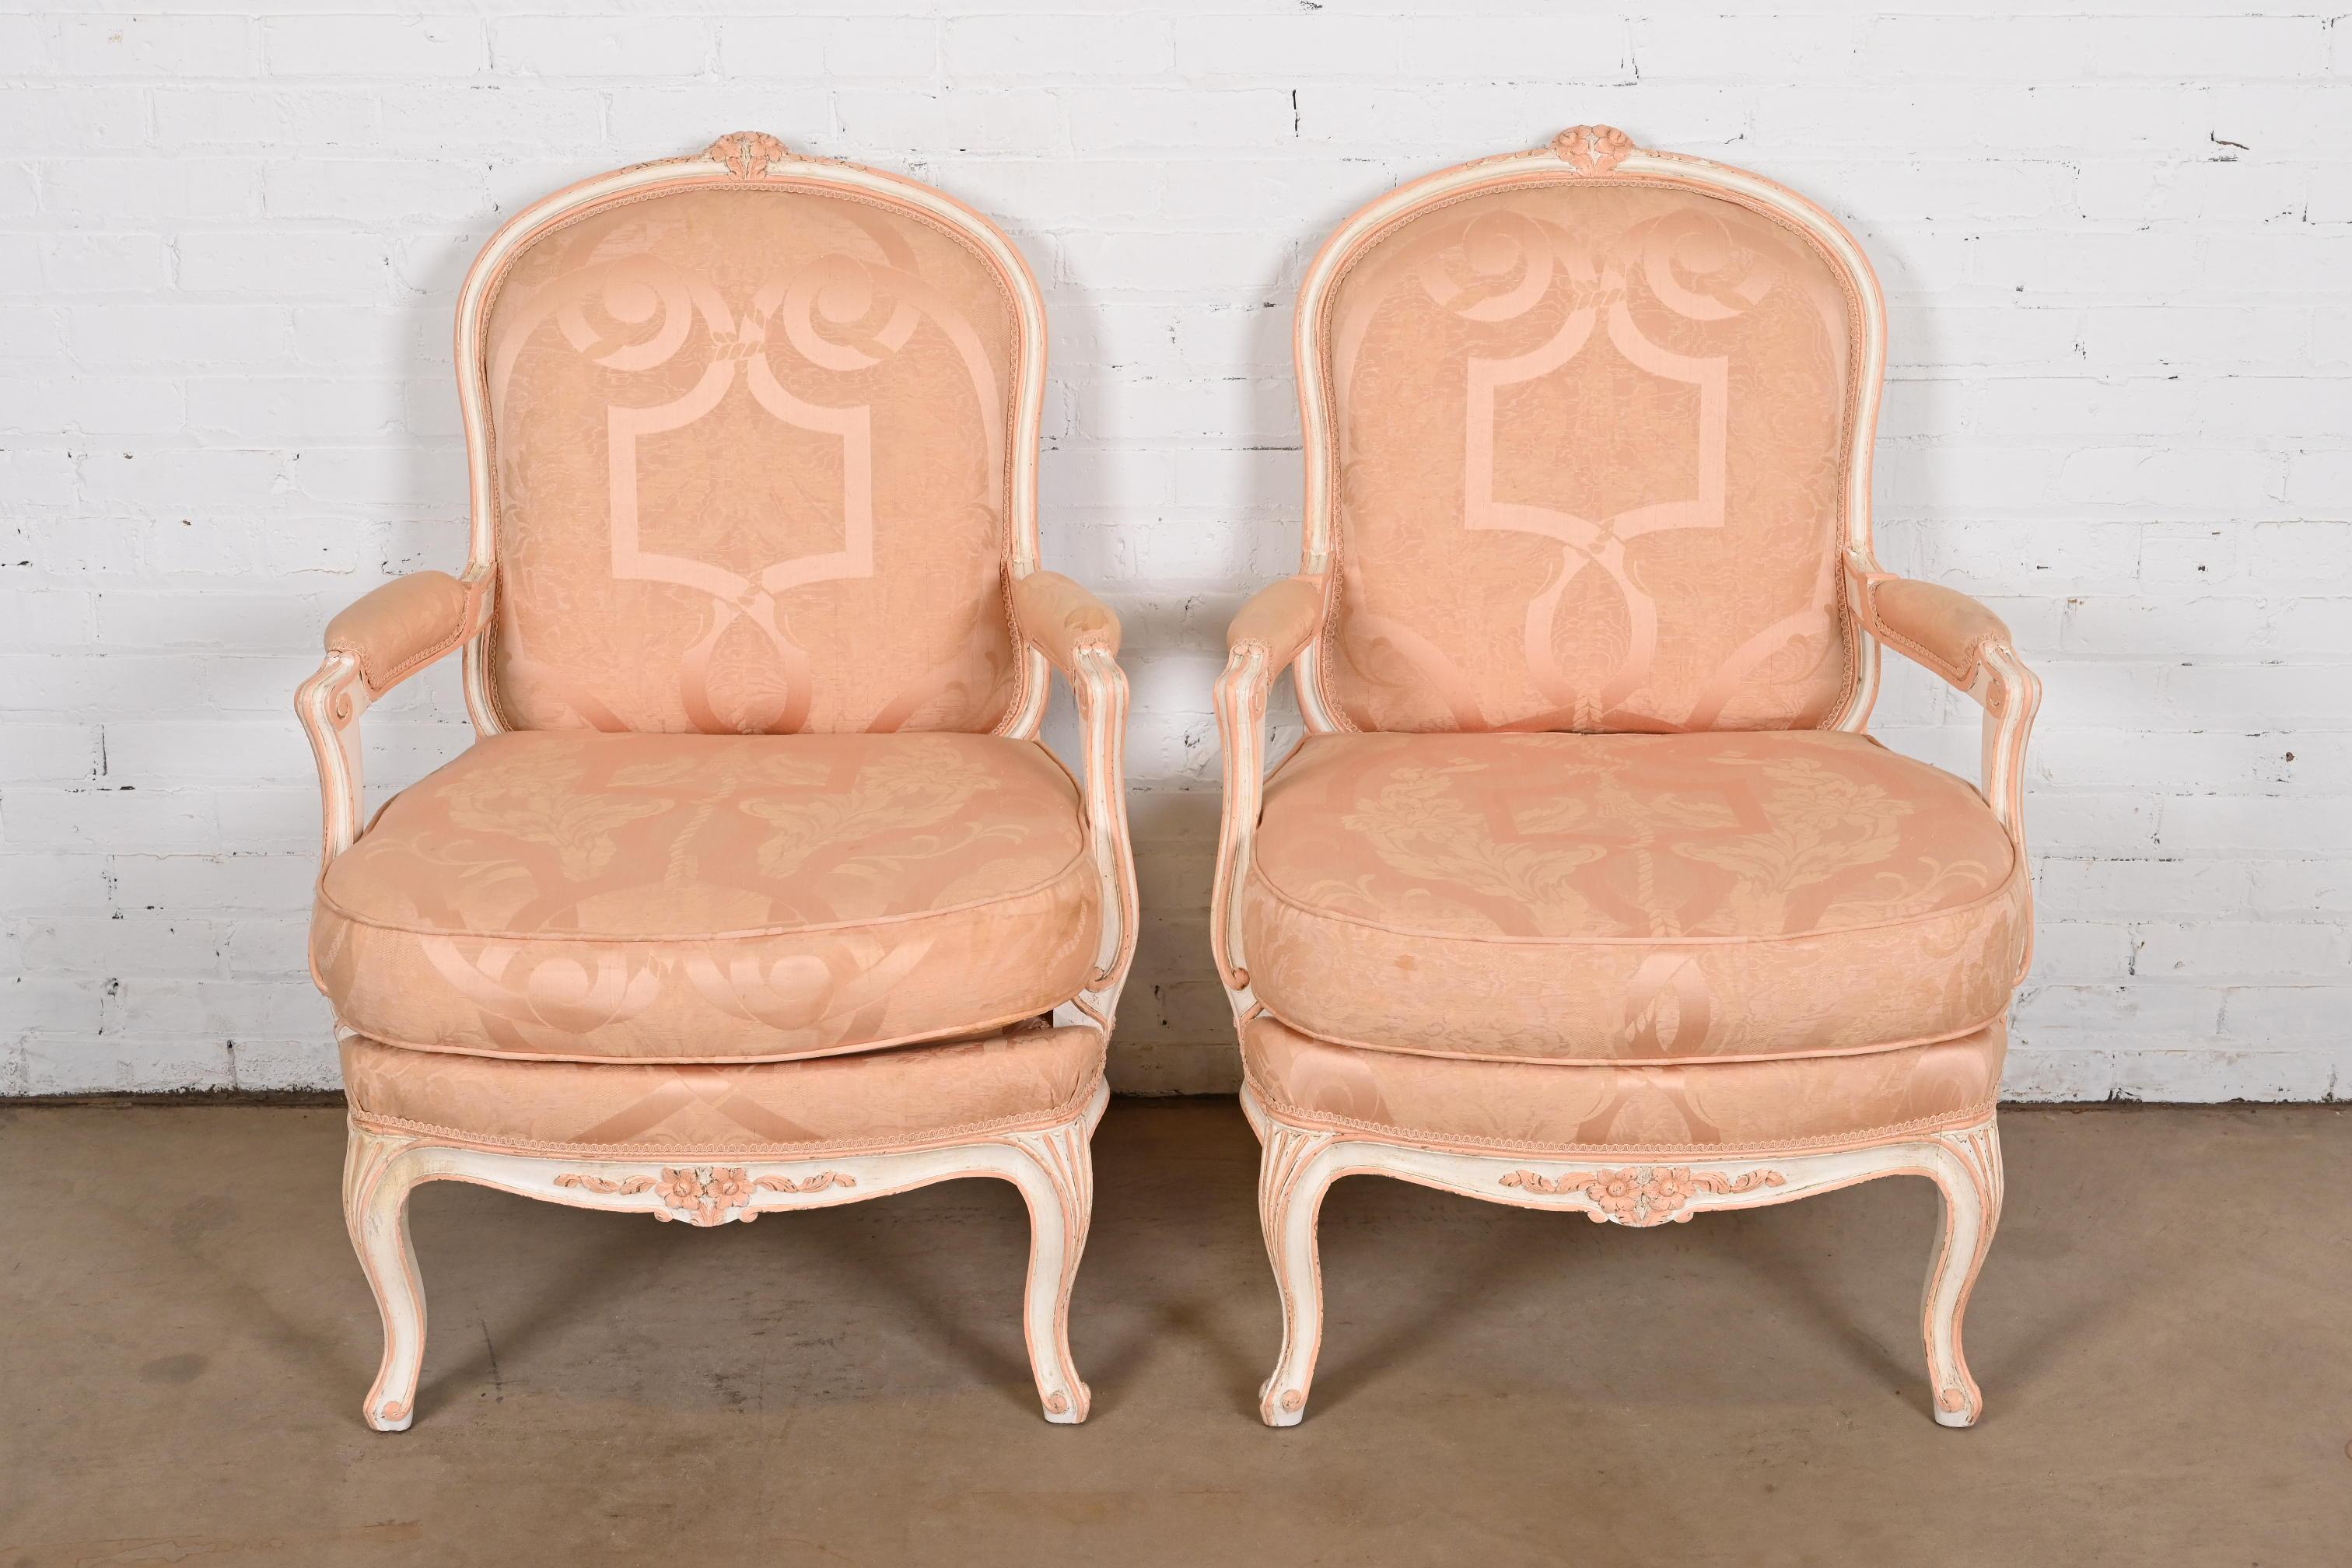 French Provincial Louis XV Carved Painted Walnut Fauteuils, Pair In Good Condition For Sale In South Bend, IN